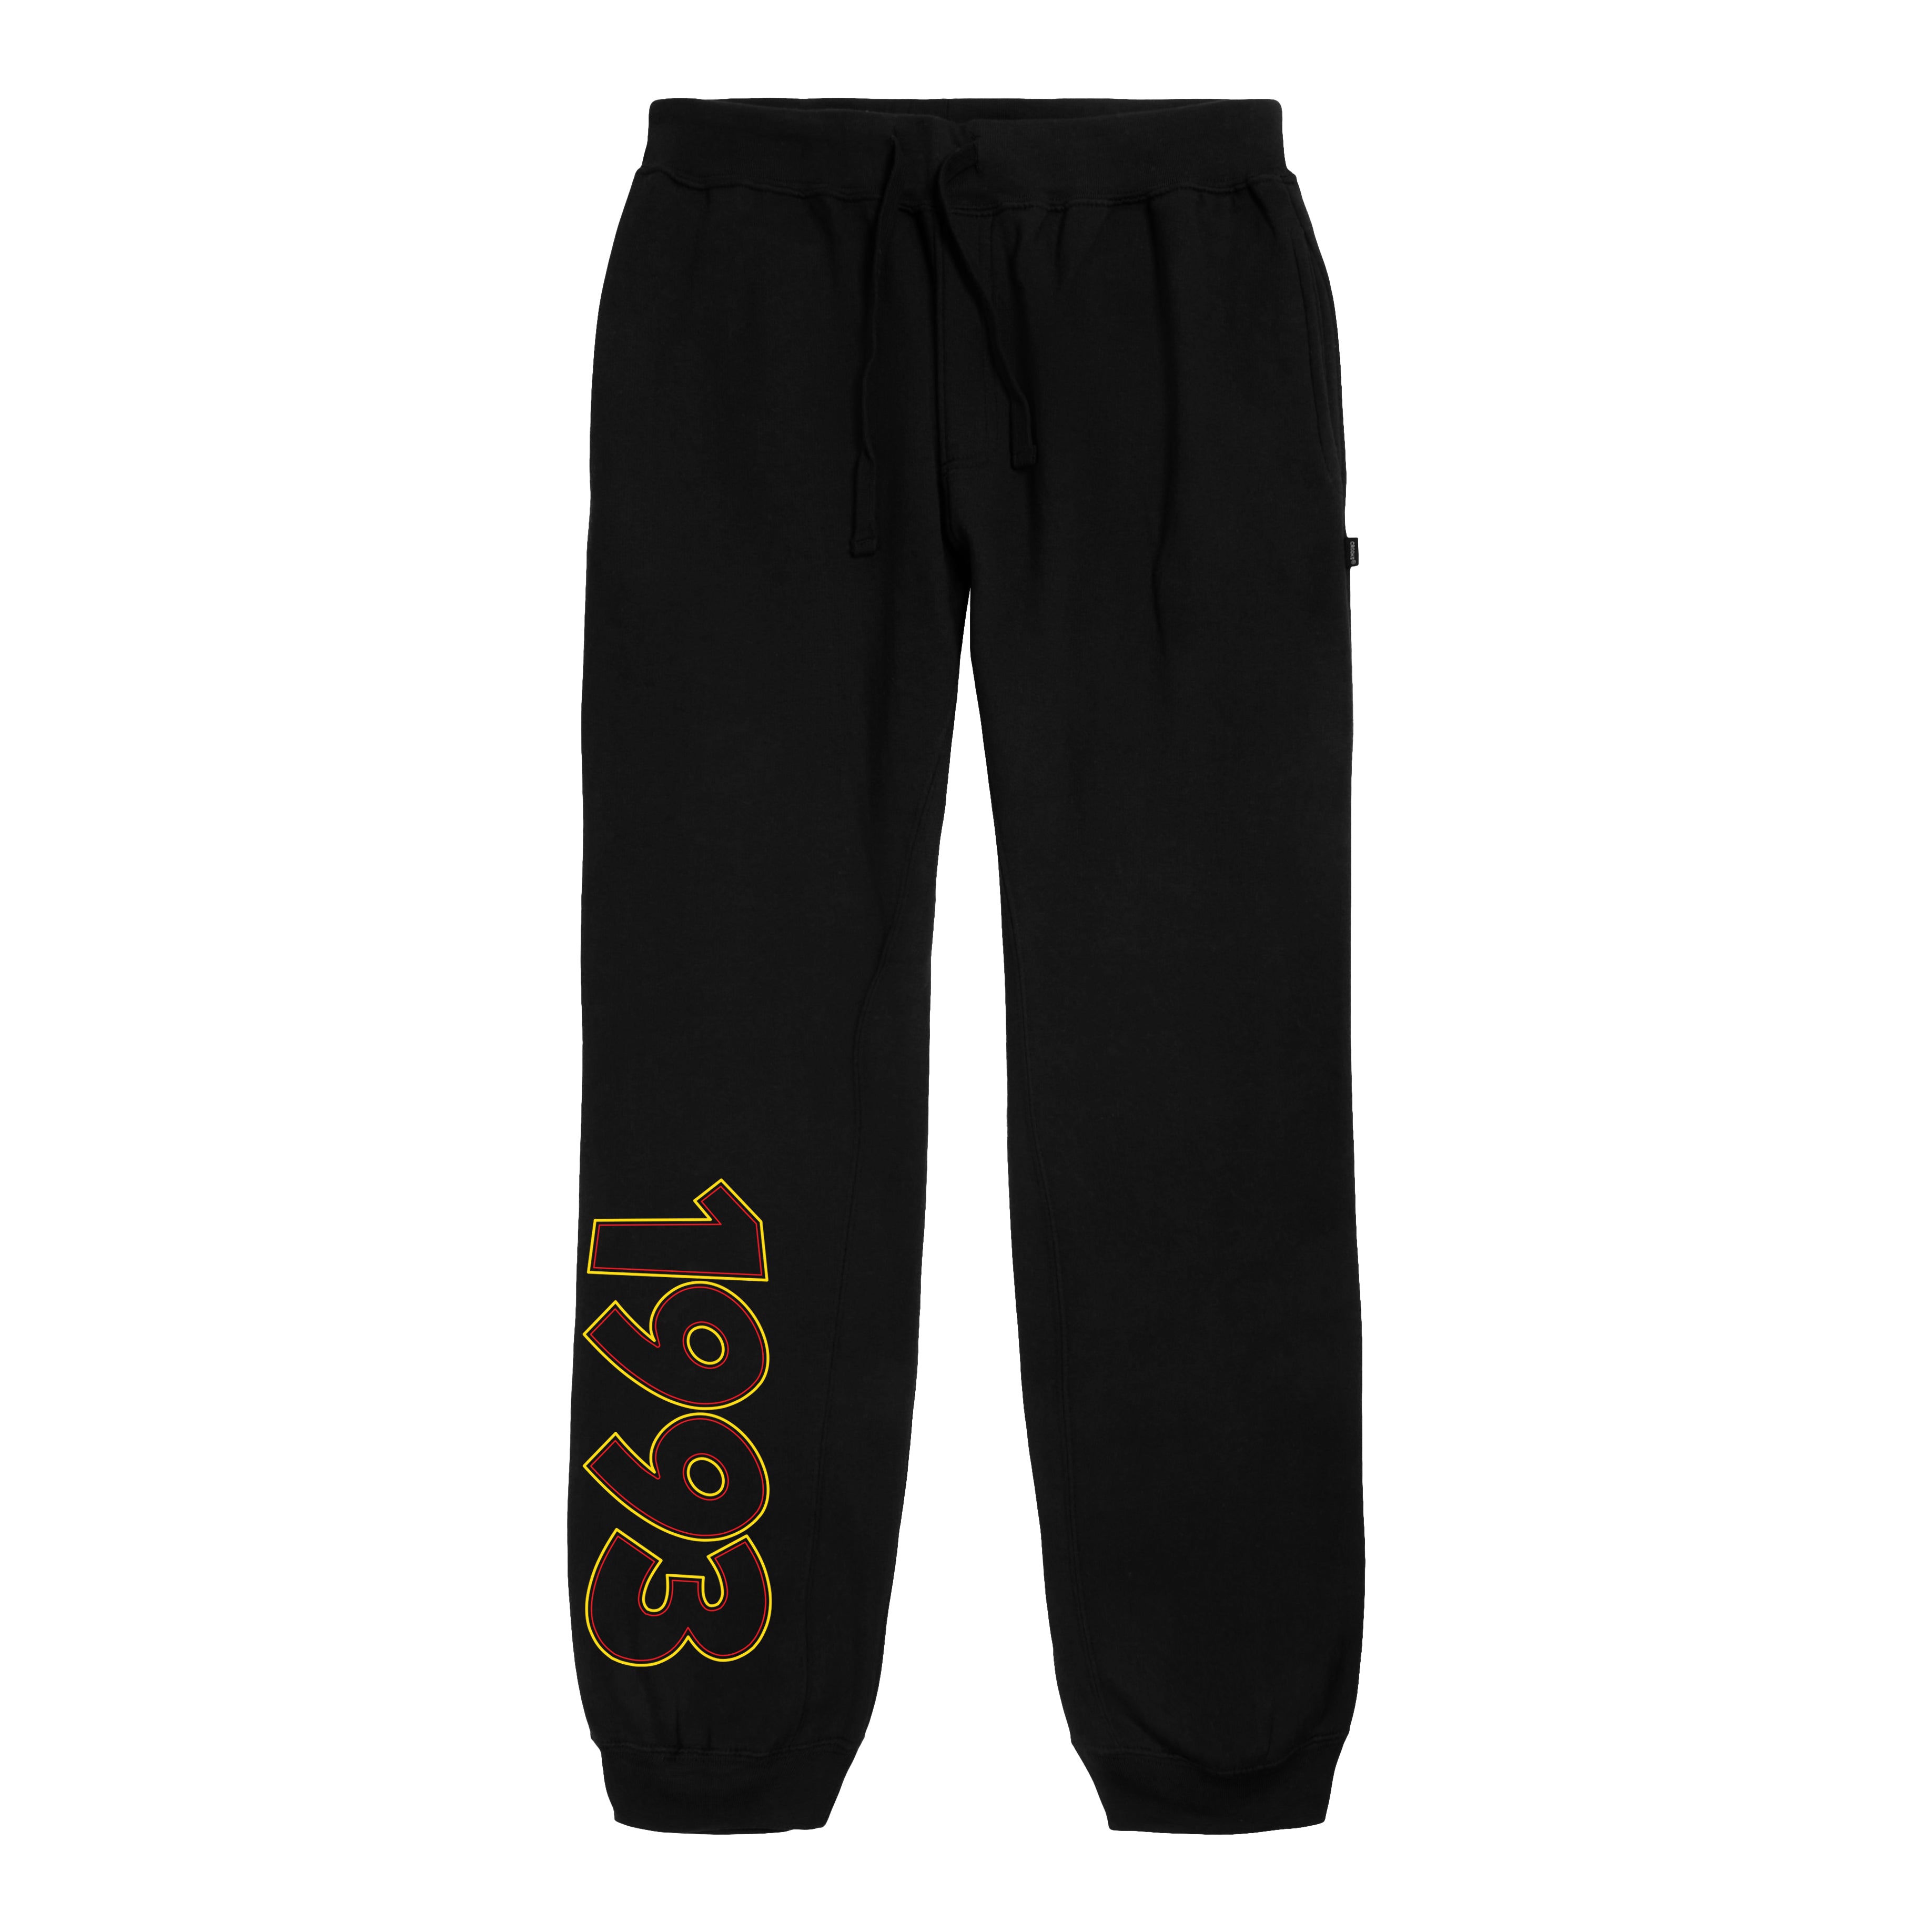 Doggystyle 1993 Joggers